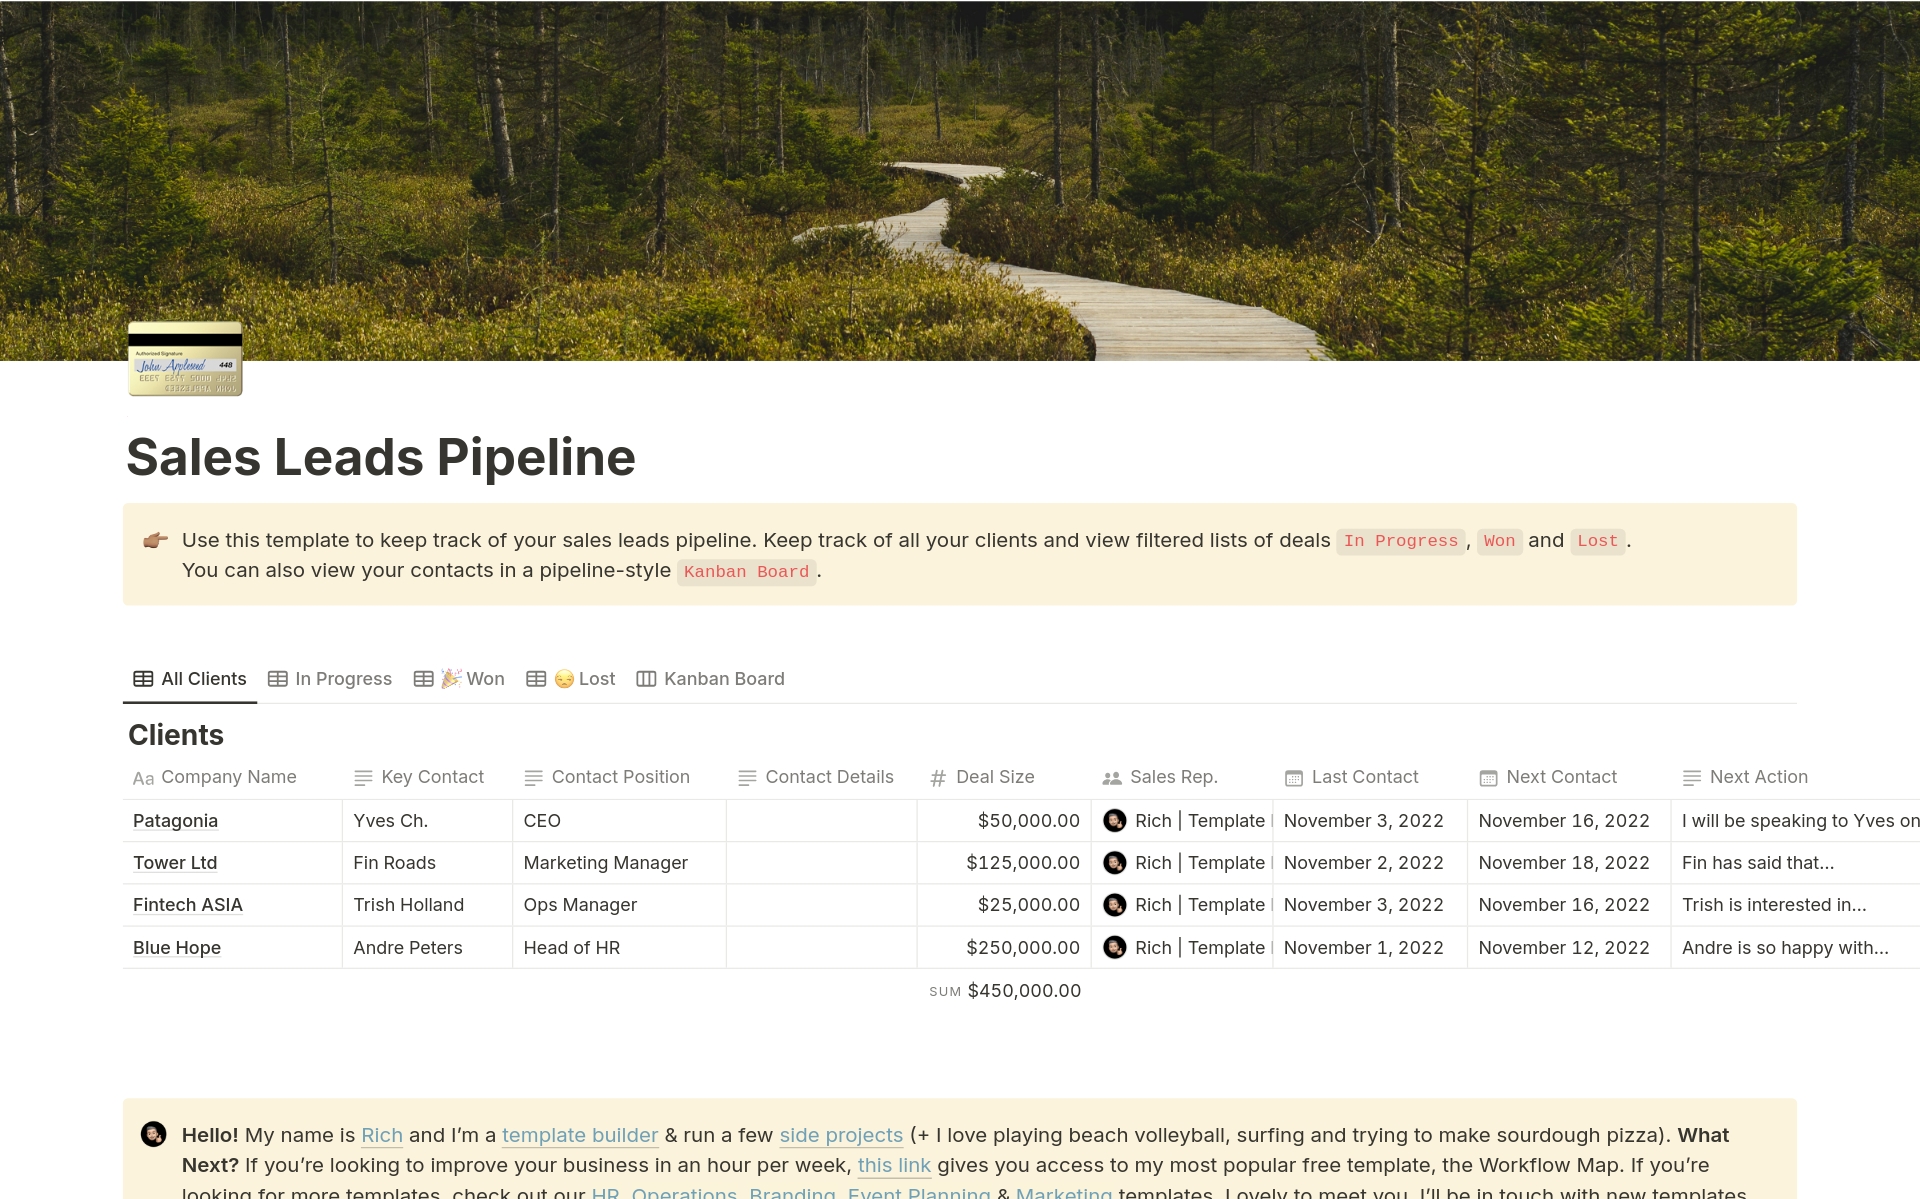 Use this template to keep track of your sales leads pipeline in Notion.